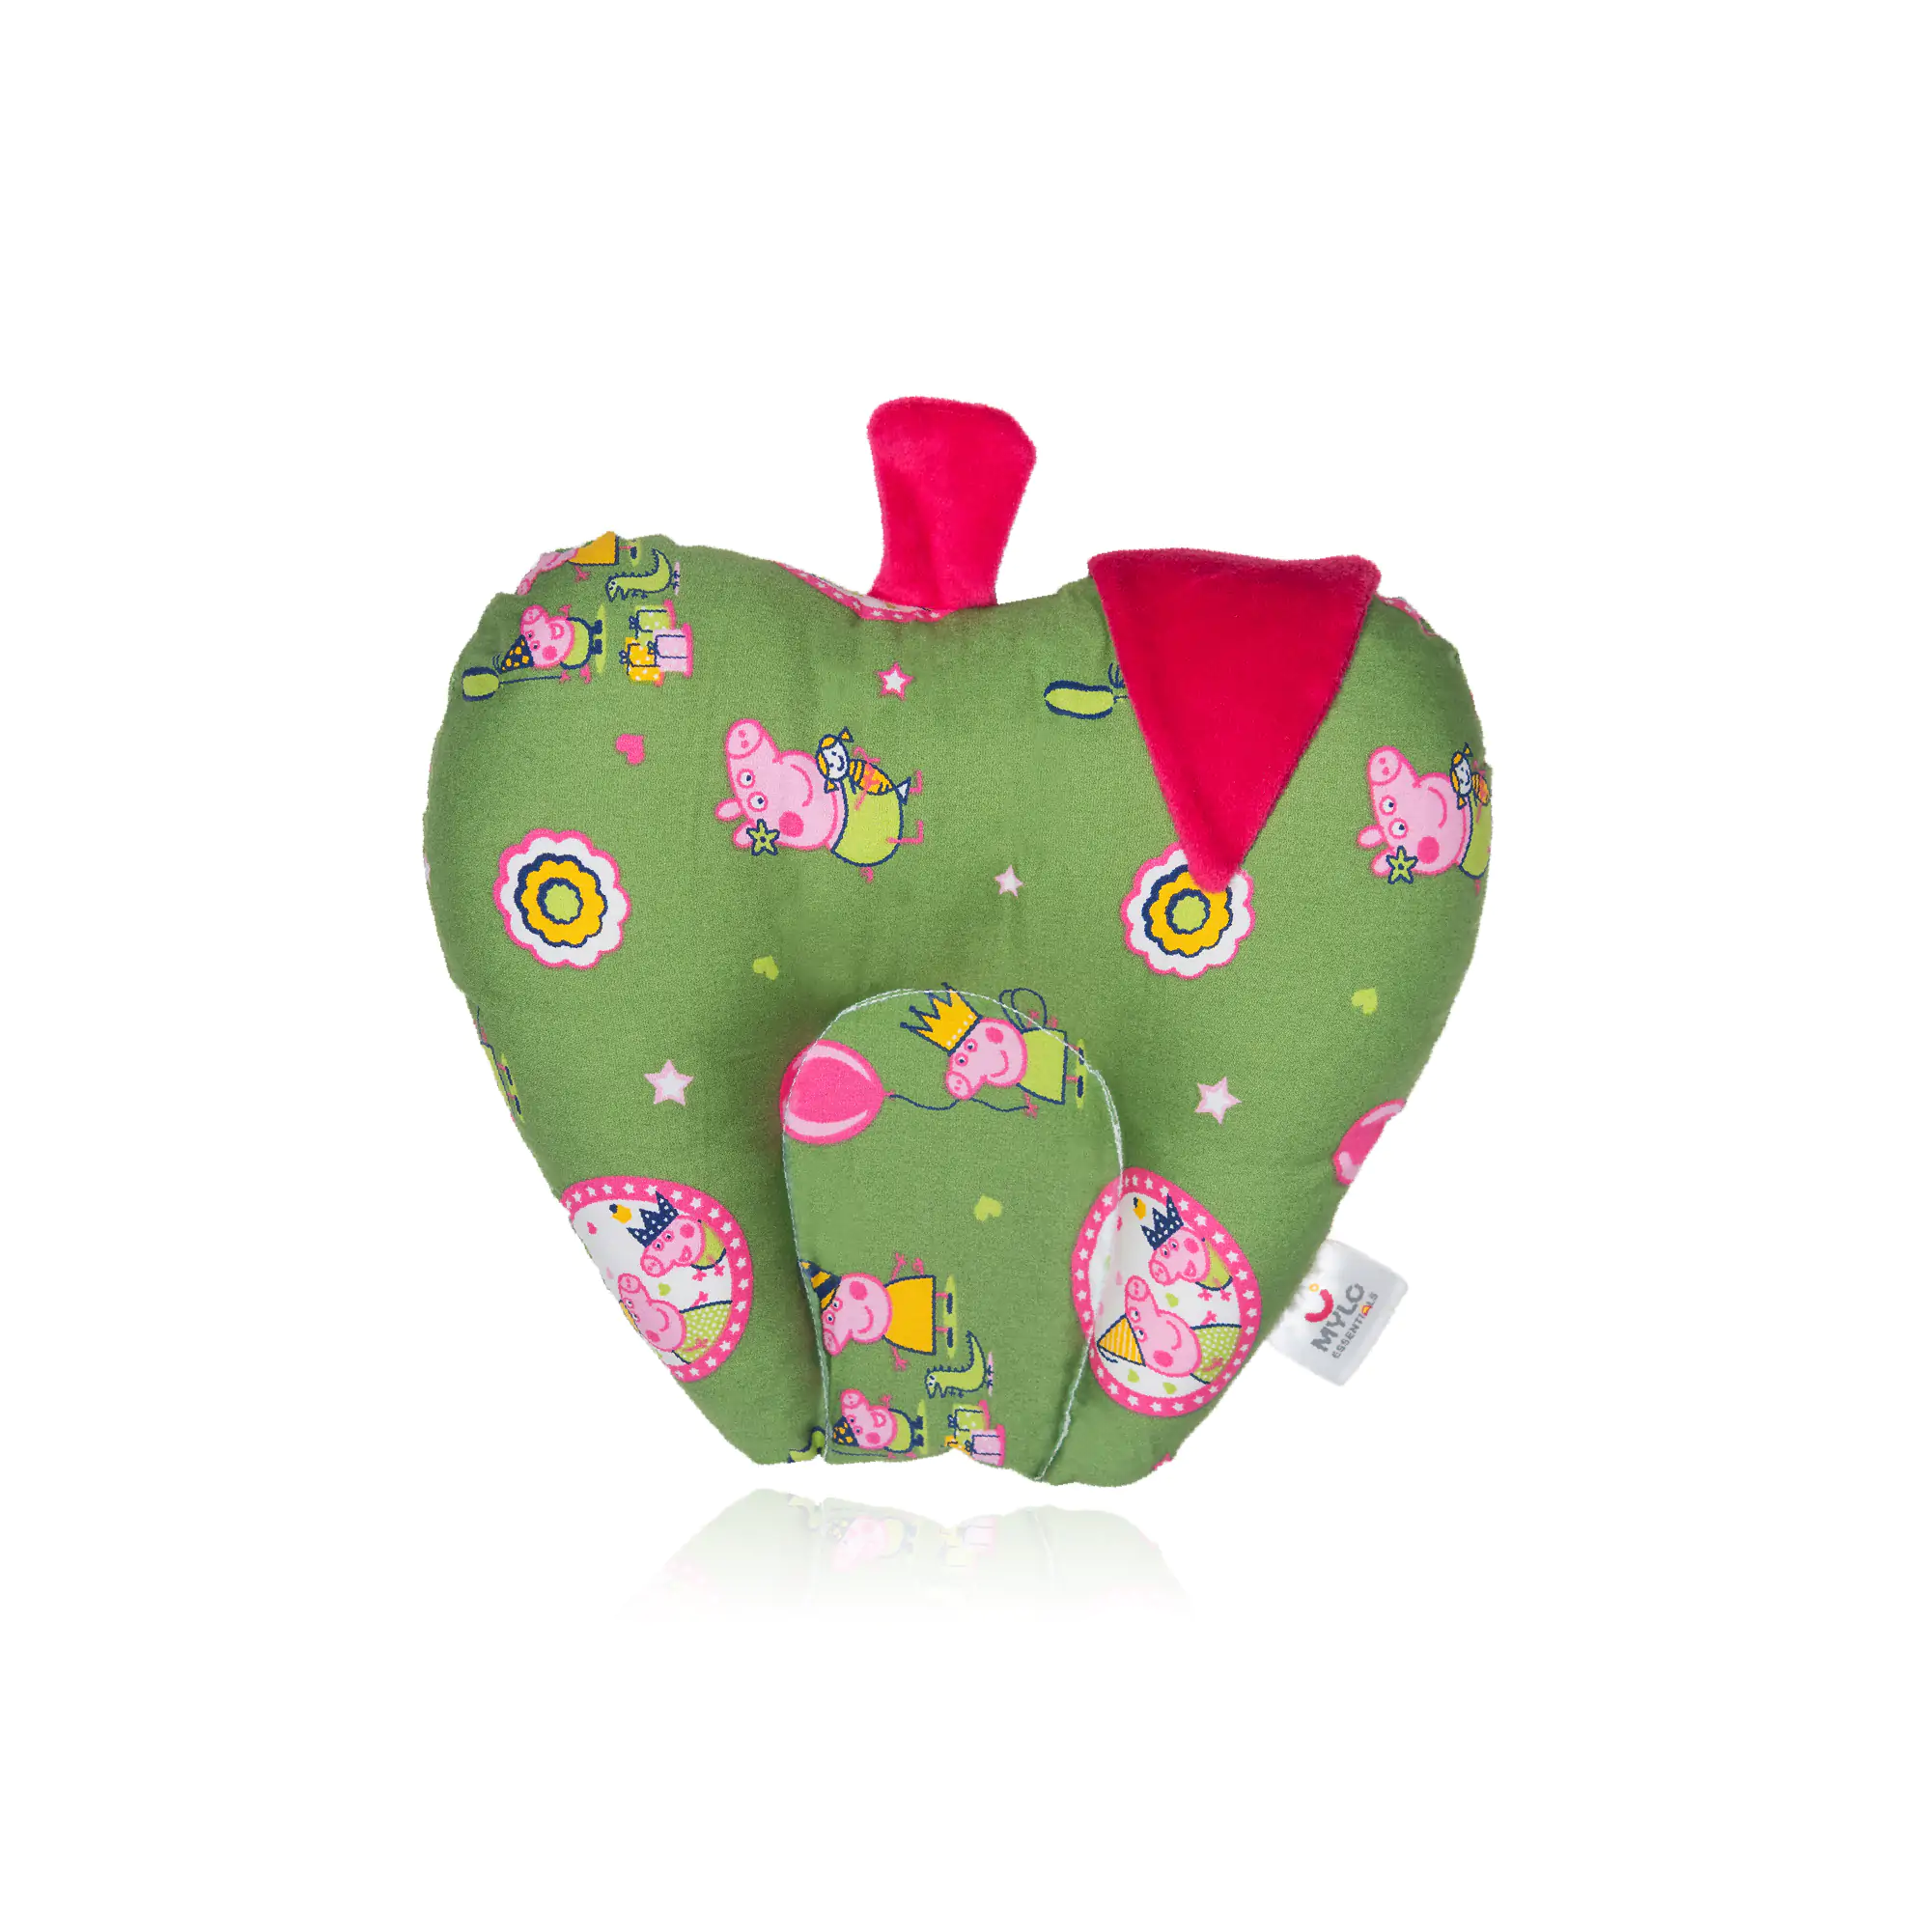 Mylo Baby Head Shaping Pillow with Mustard Seeds (0-12 Months) - Apple Shaped (Peppa Party Green)